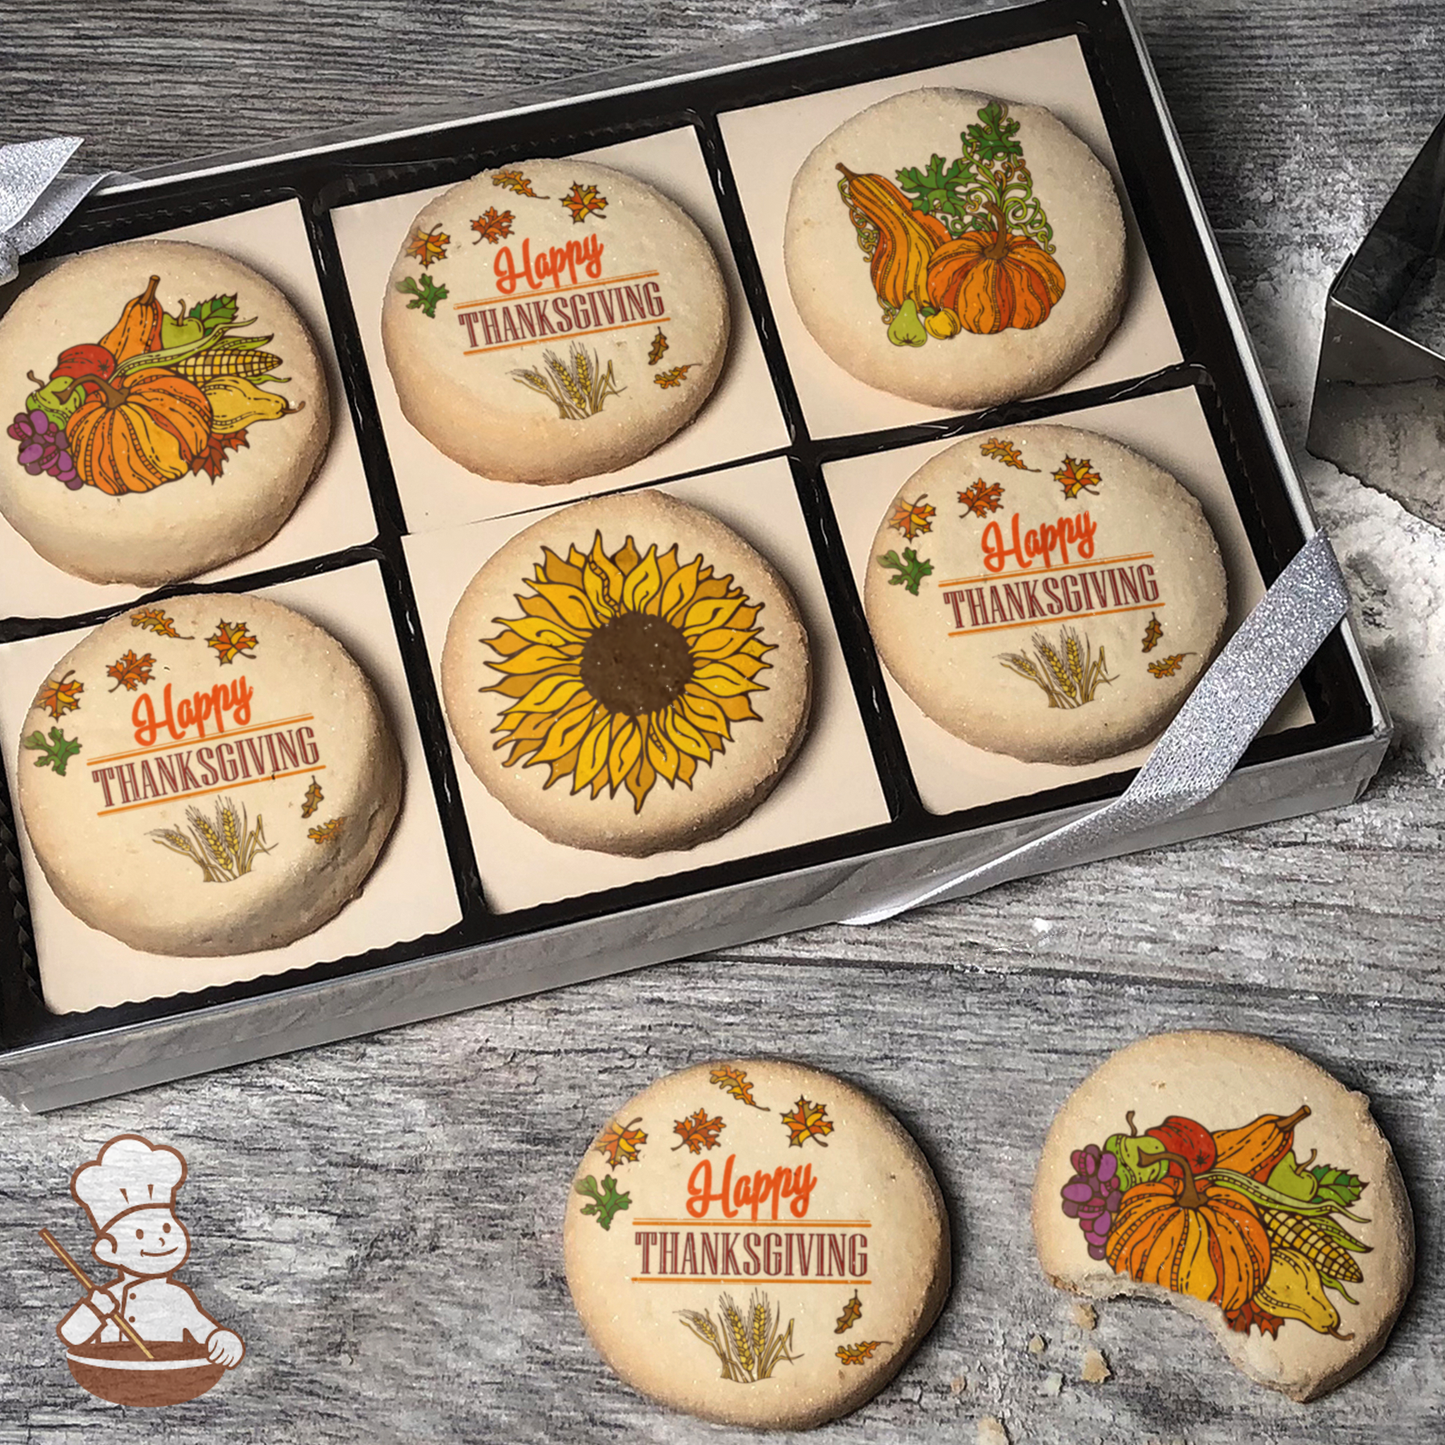 Harvest Time Cookie Gift Box (Round Unfrosted)